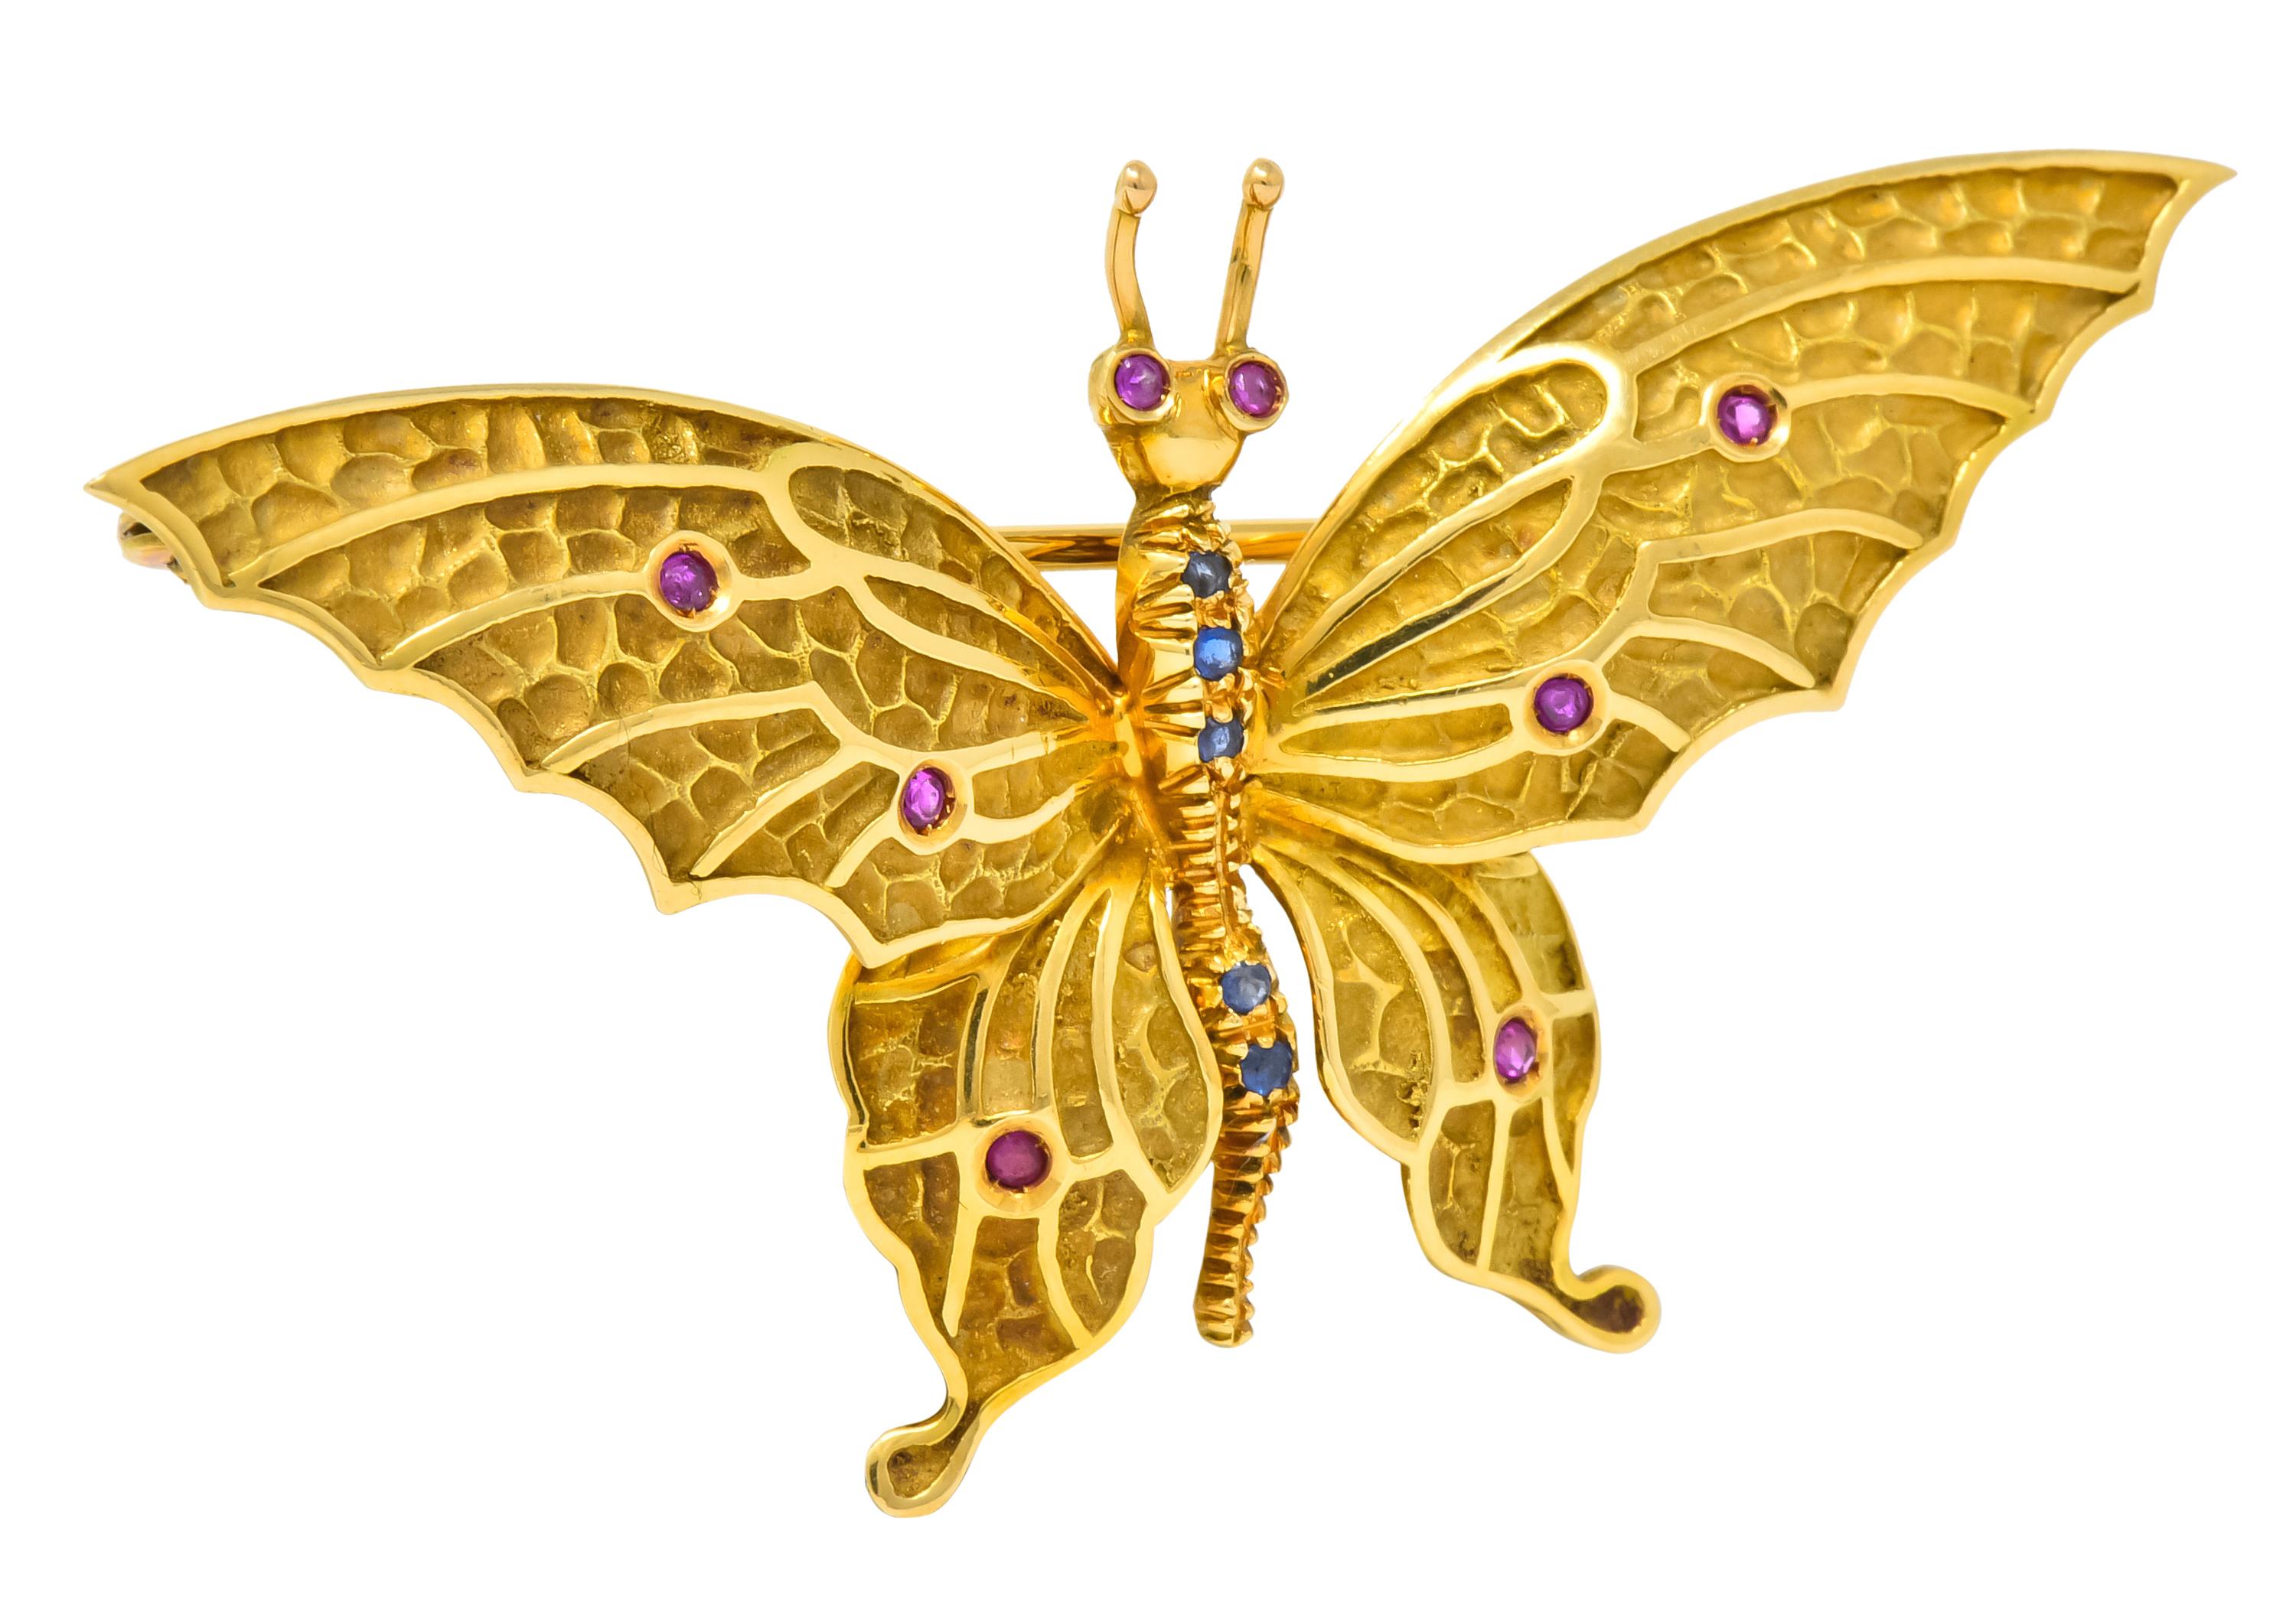 Brooch designed as a butterfly featuring matte green gold repoussé wings with high polished edges

With textured ribbed body and whimsical antennae

Accented by round cut rubies and sapphires throughout, translucent and brightly colored

Completed